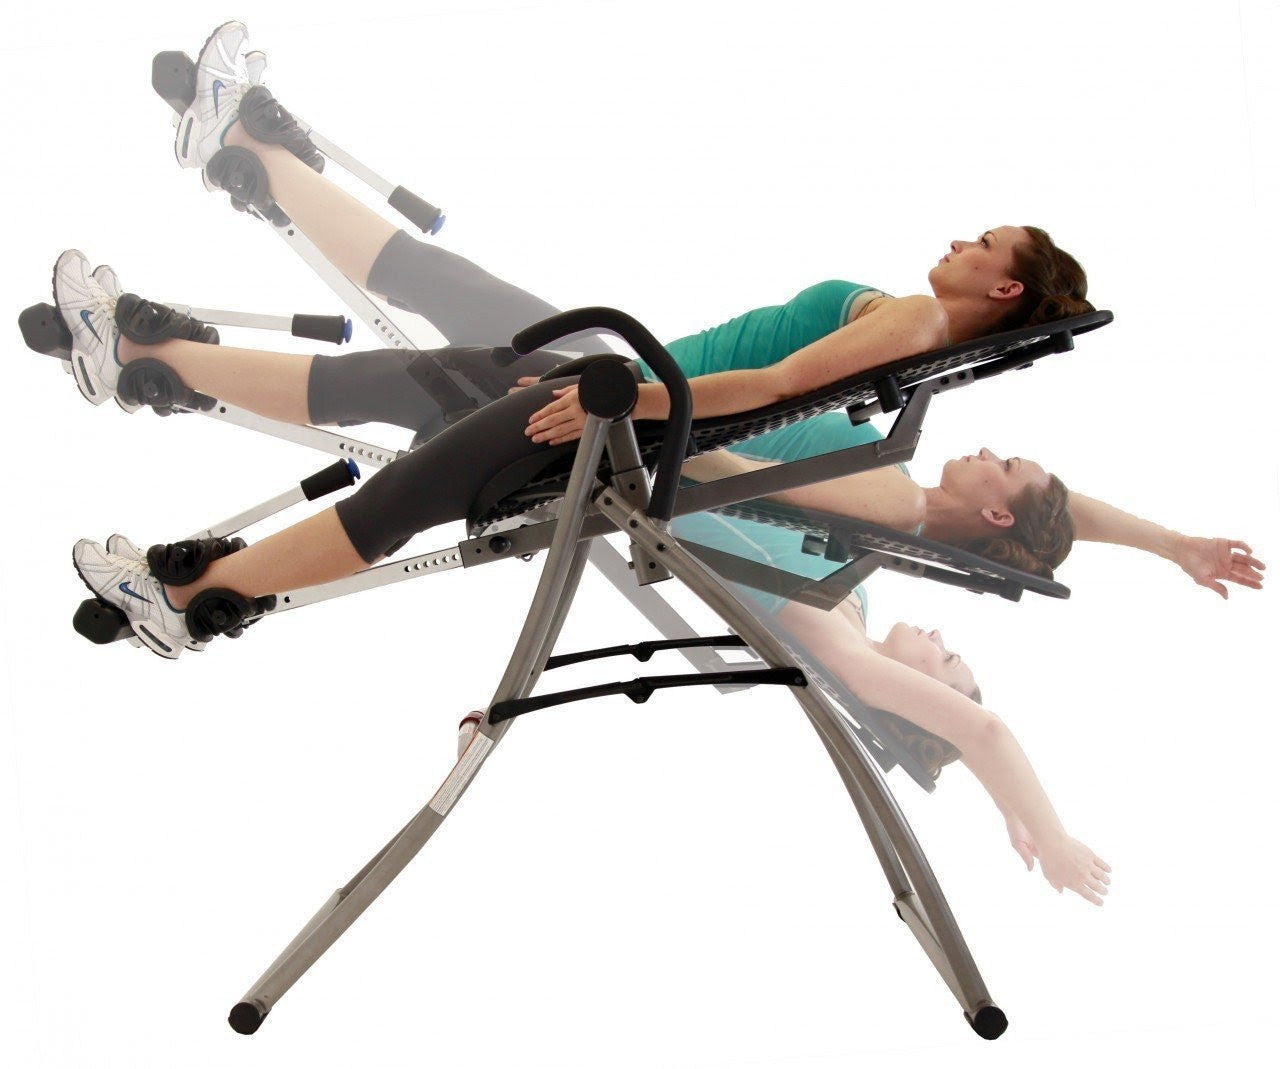 Teeter Contour L5 Inversion Table In Use